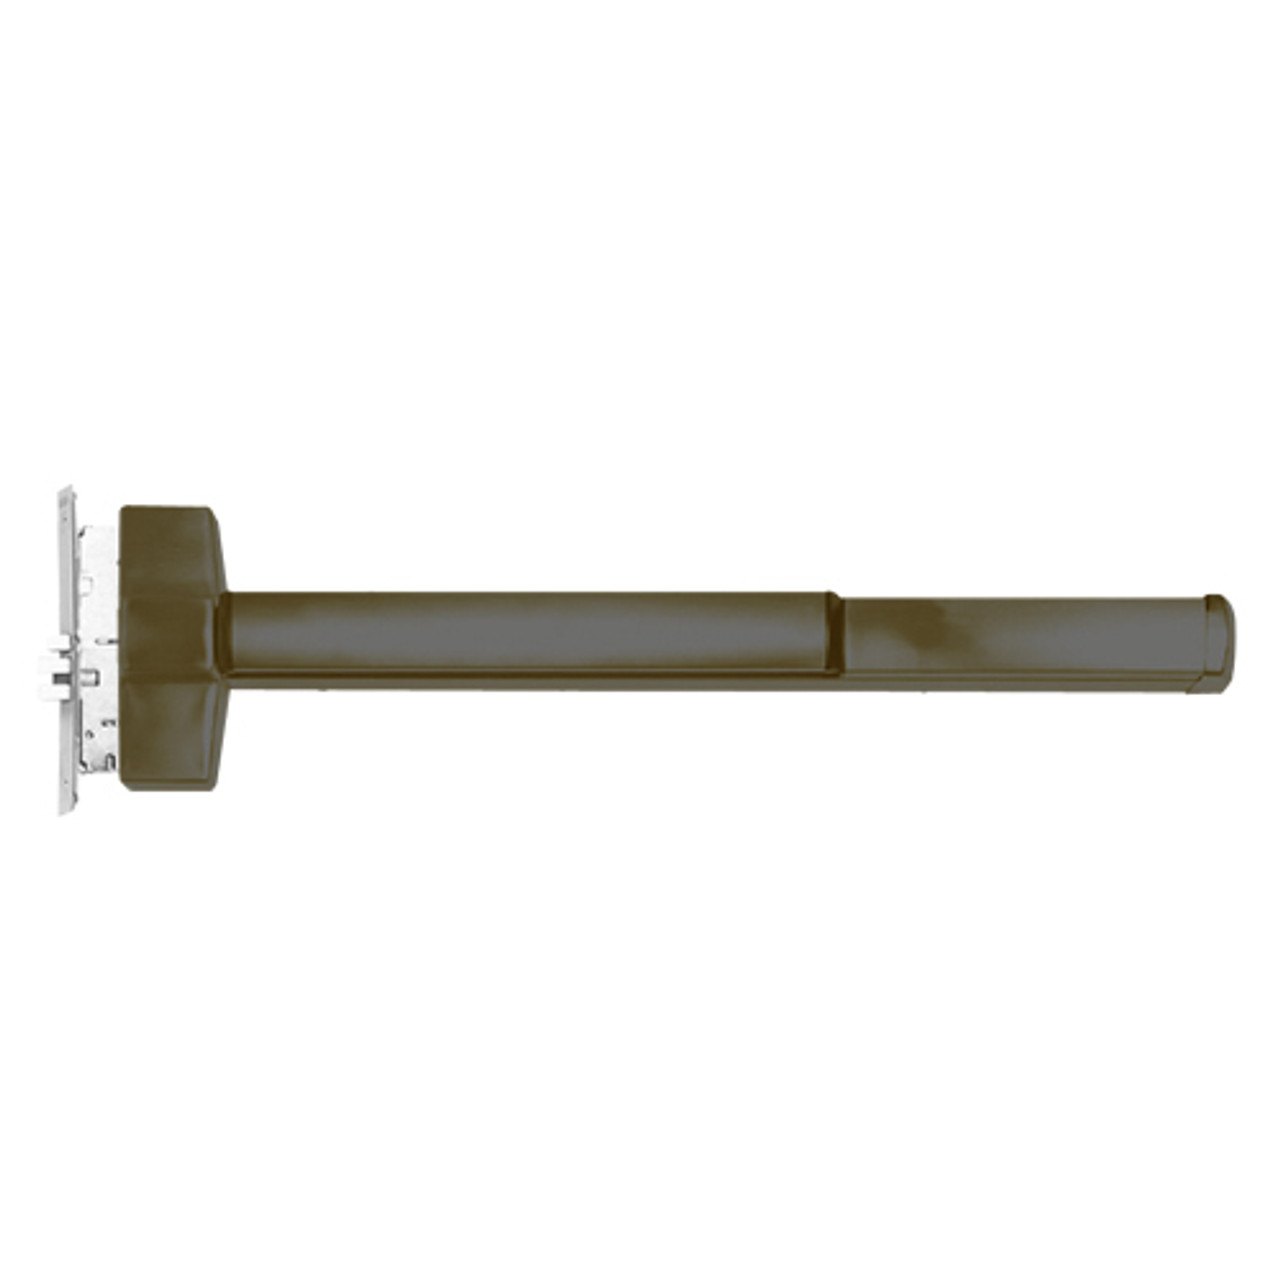 ED5657AL-613-LHR Corbin ED5600 Series Fire Rated Mortise Exit Device in Oil Rubbed Bronze Finish